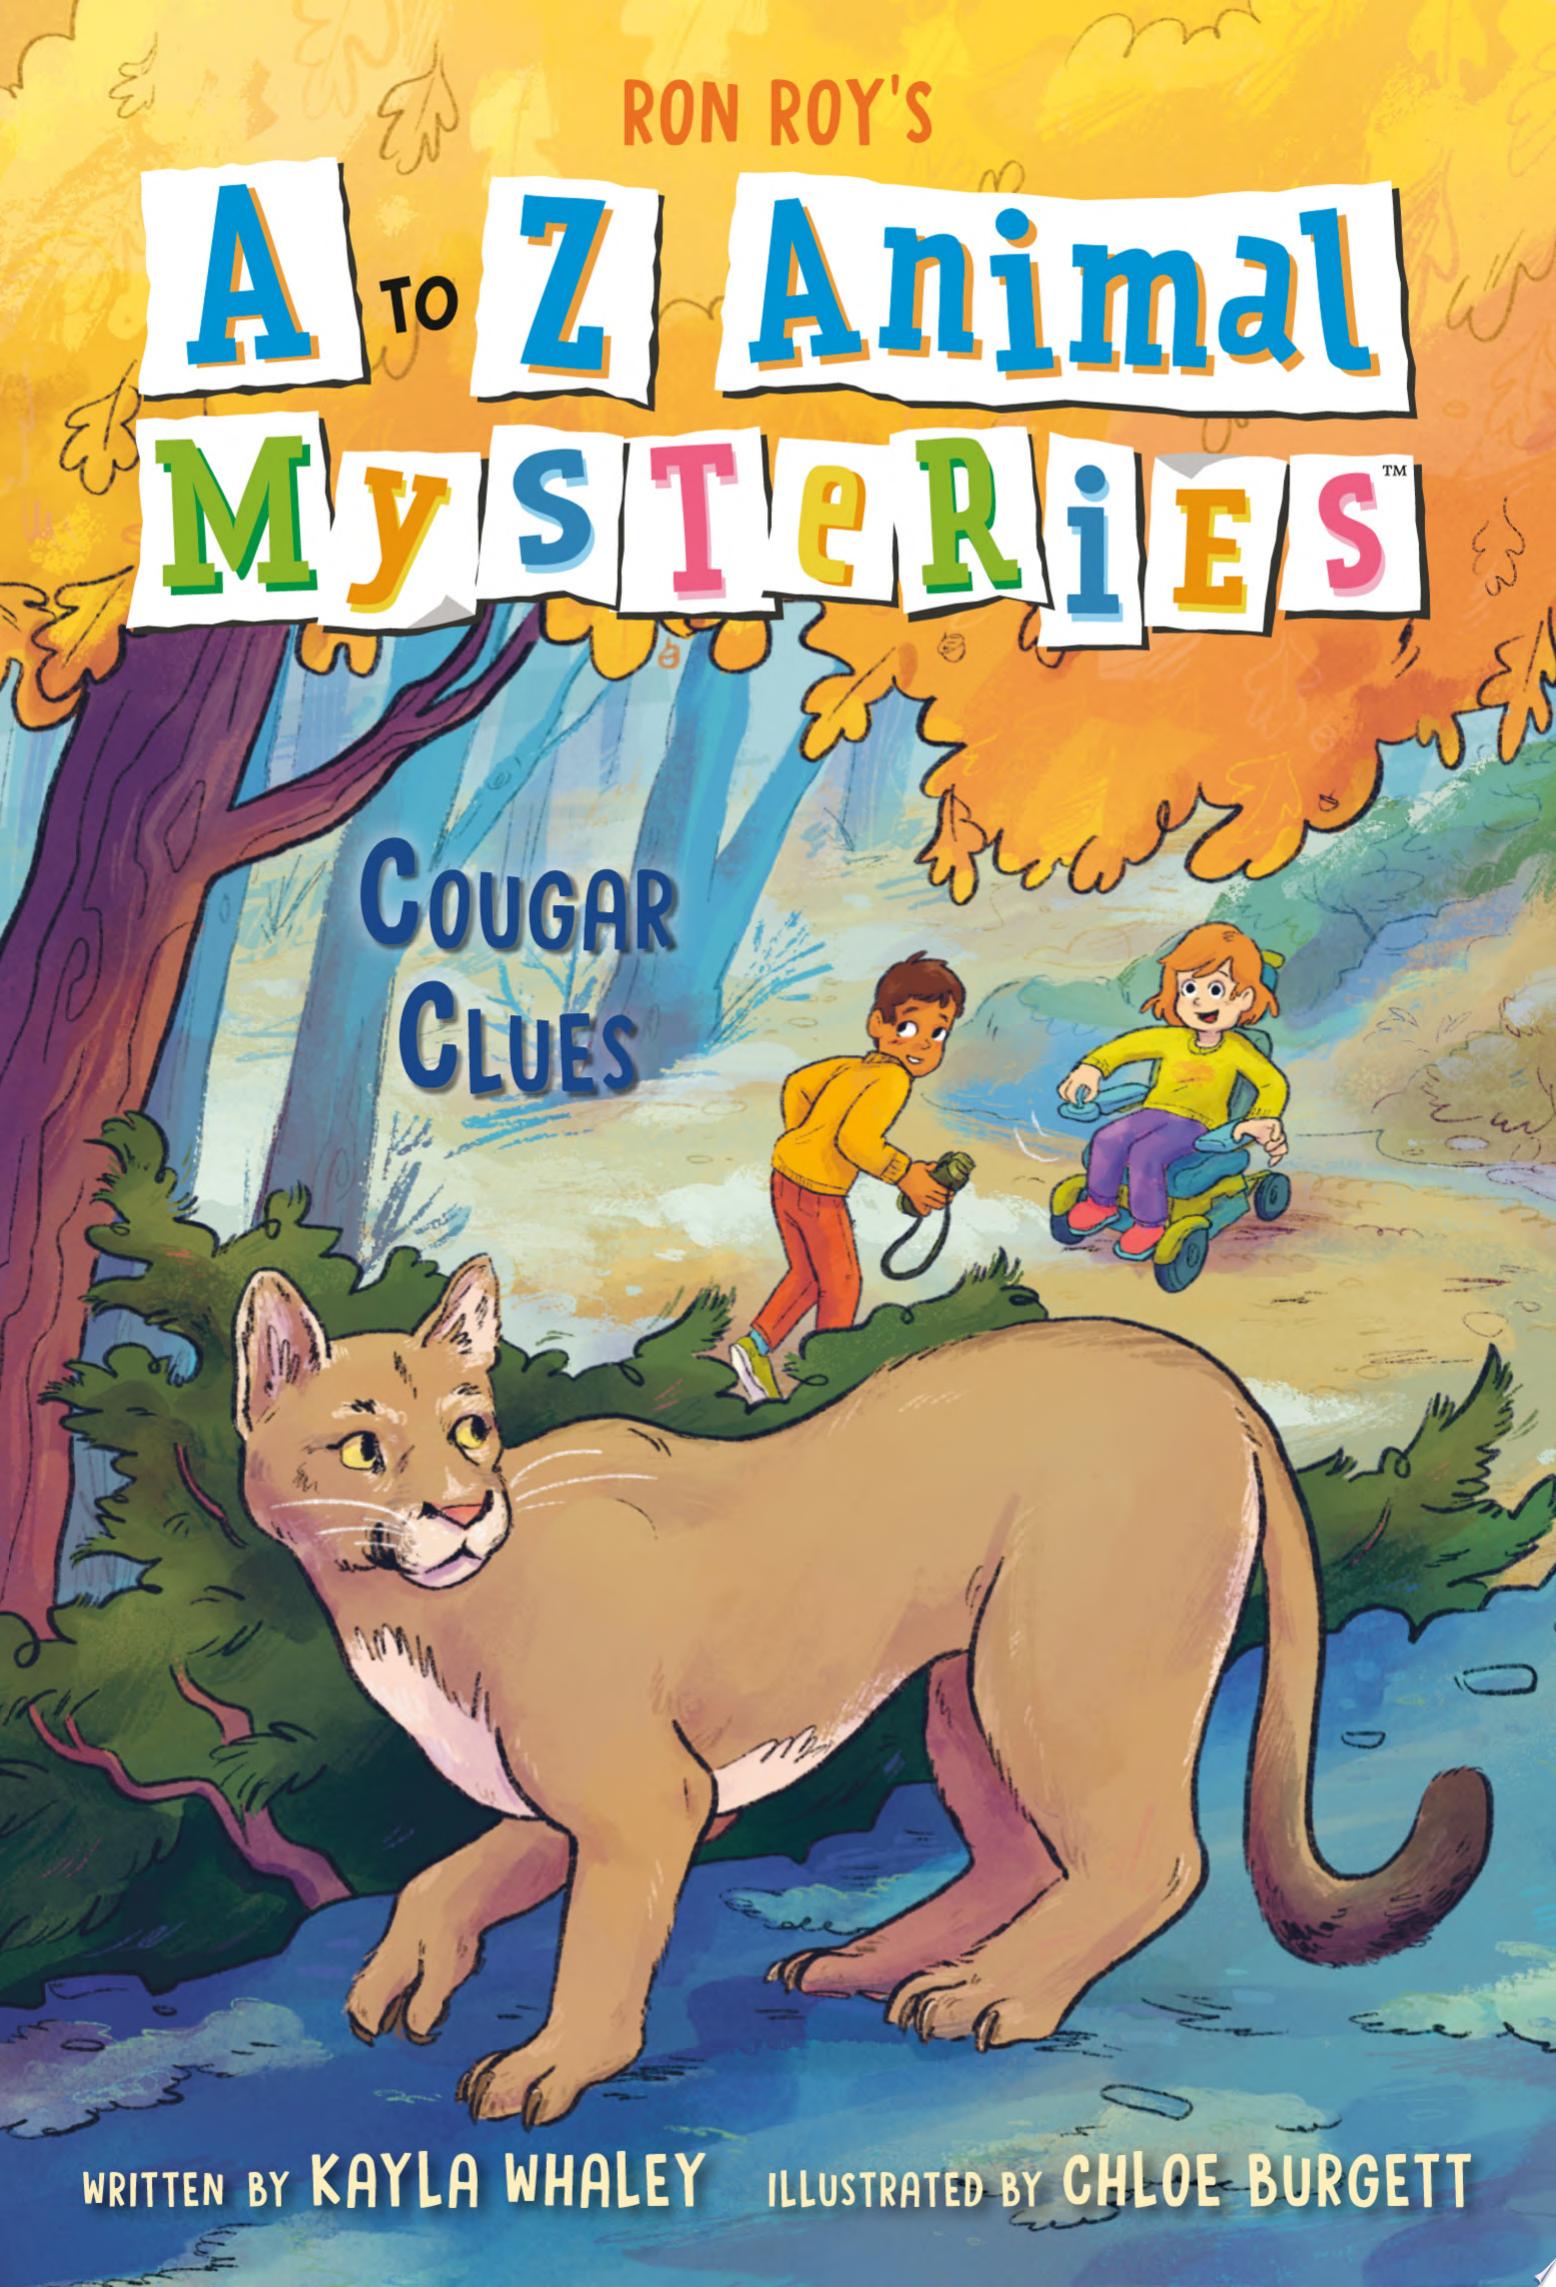 Image for "A to Z Animal Mysteries #3: Cougar Clues"